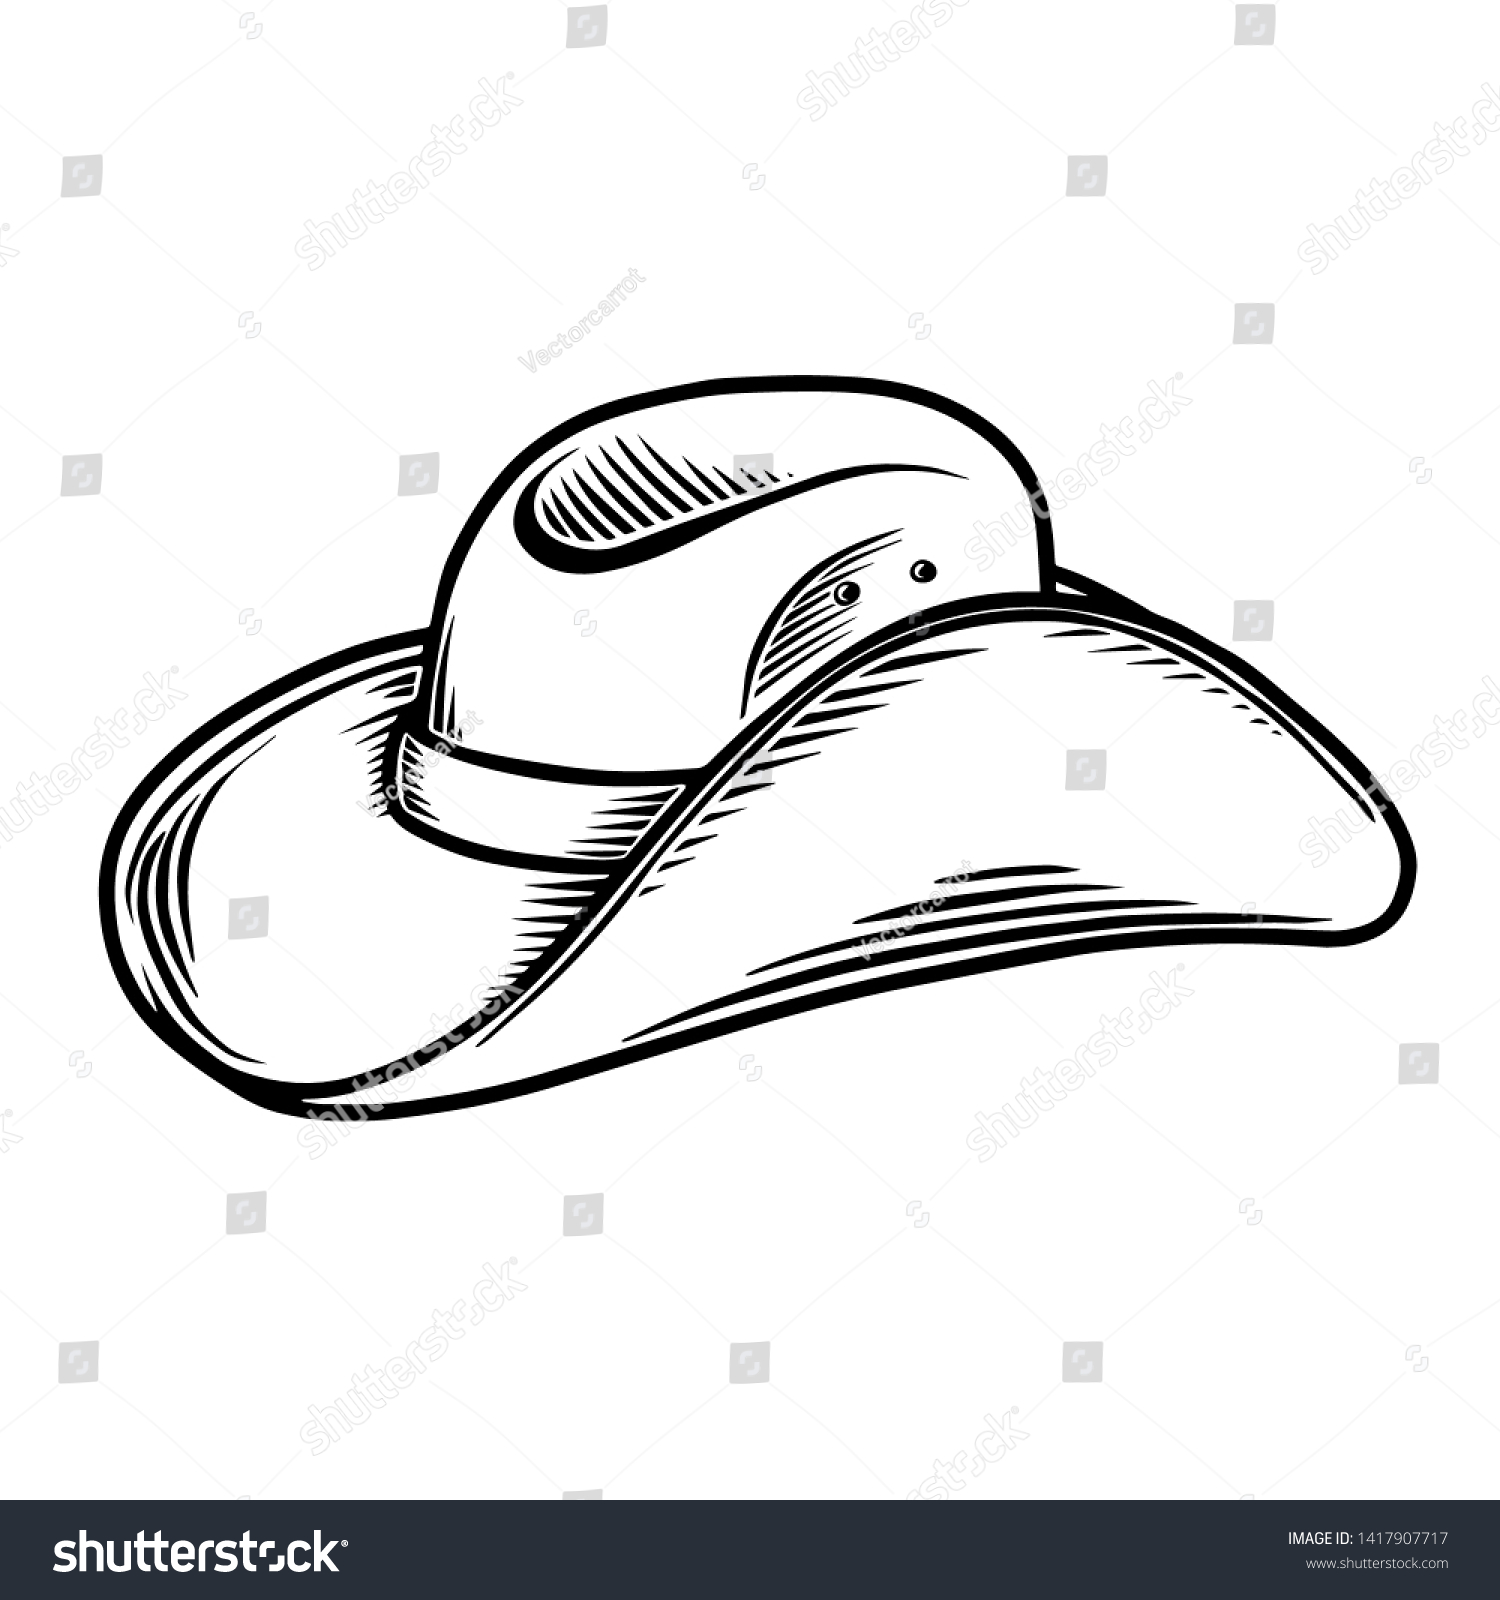 Illustration Cowboy Hat Isolated On White Stock Vector Royalty Free Shutterstock